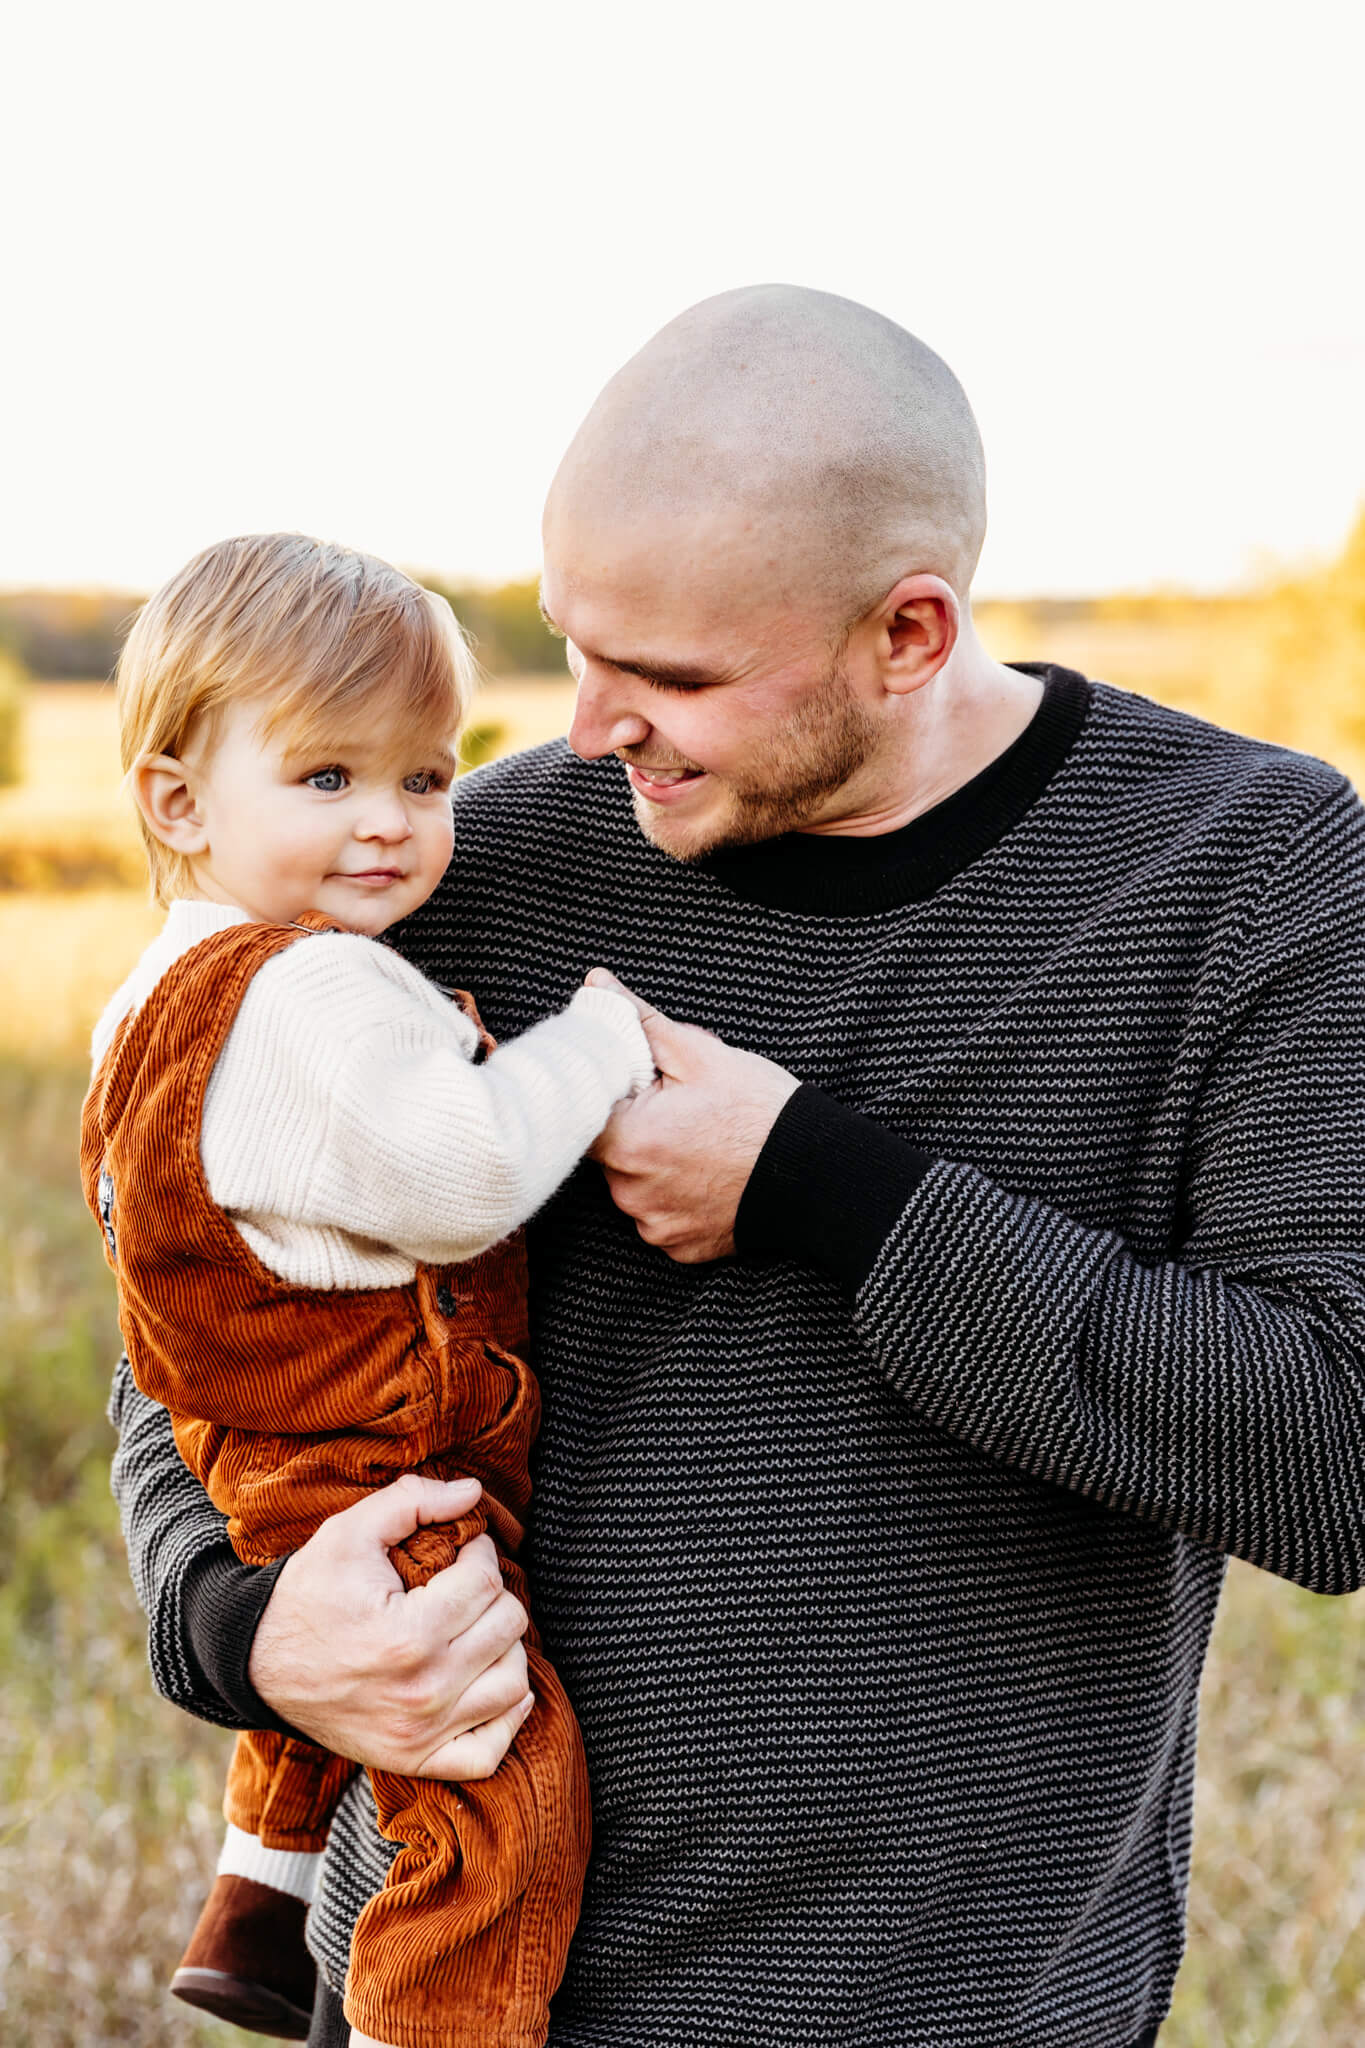 dad holding his 1 year old son as they laugh together while standing in a grassy field